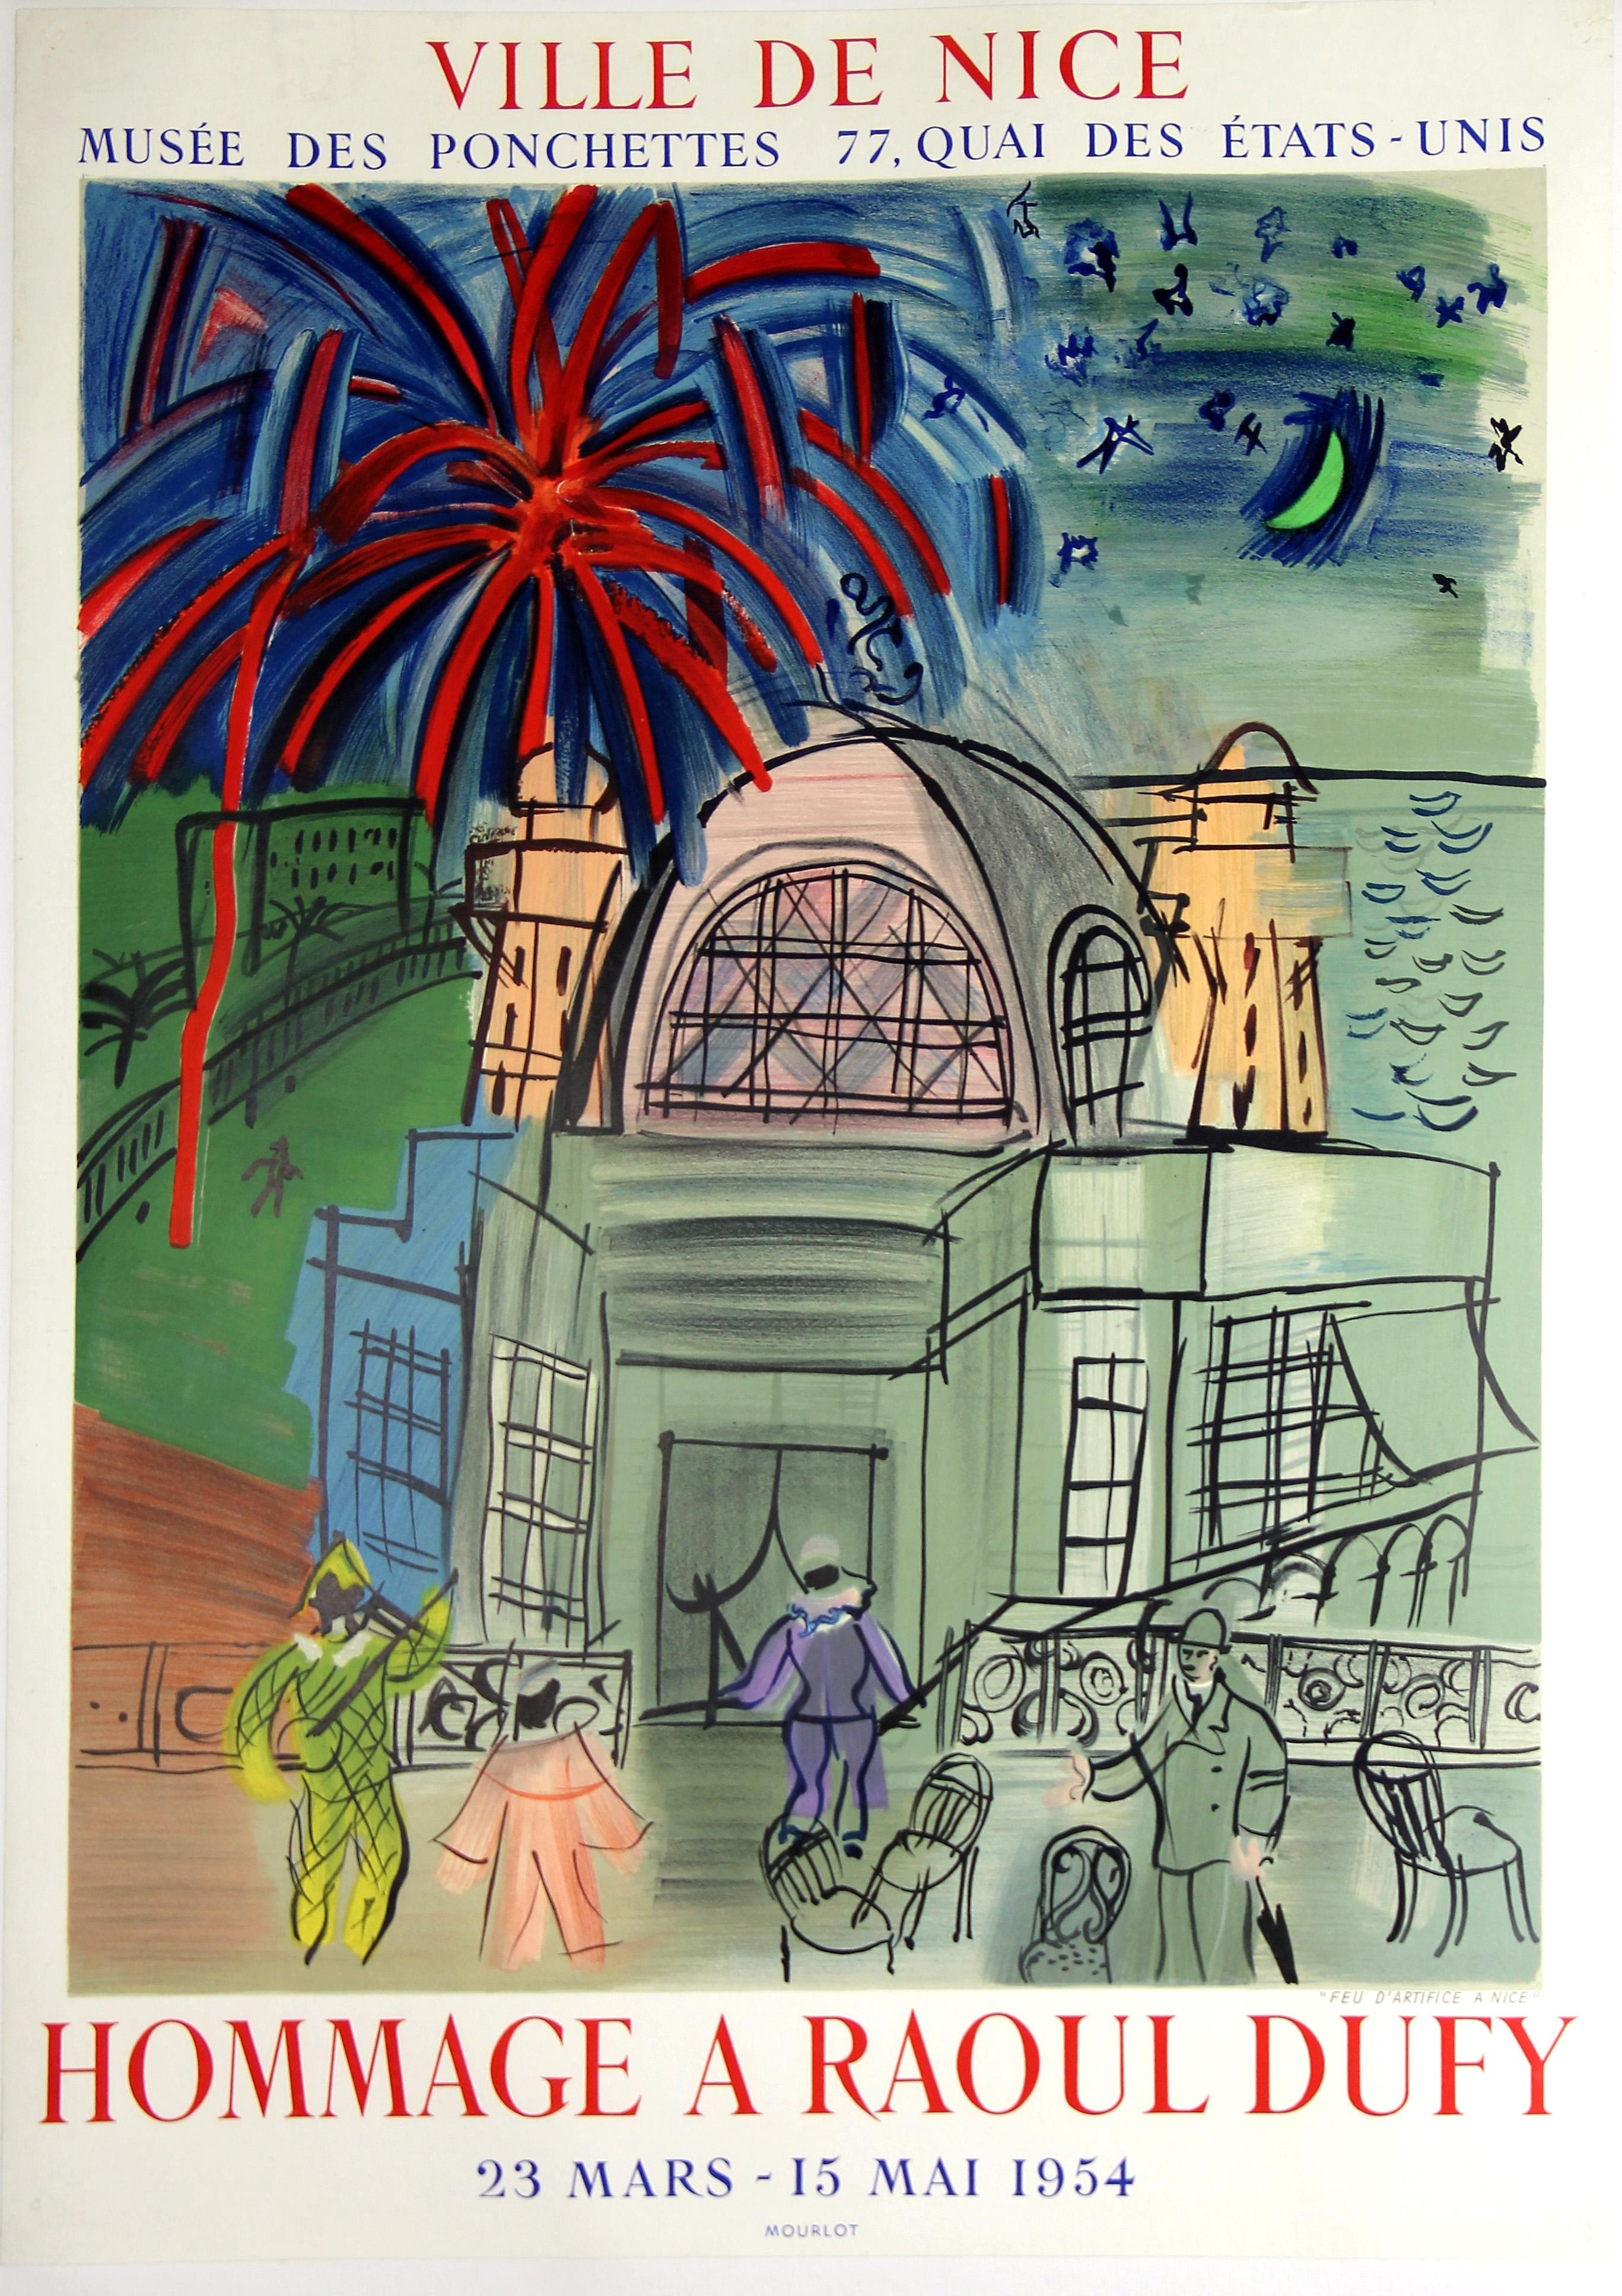 Vintage Raoul Dufy Lithographic Poster created for an exhibition at the Musee des Ponchettes, Nice. Printed by Mourlot, Paris.

Artist: (after) Raoul Dufy 

Year: 1954

Medium: Lithographic Poster

Edition: Unknown

Catalogue Raisonné: